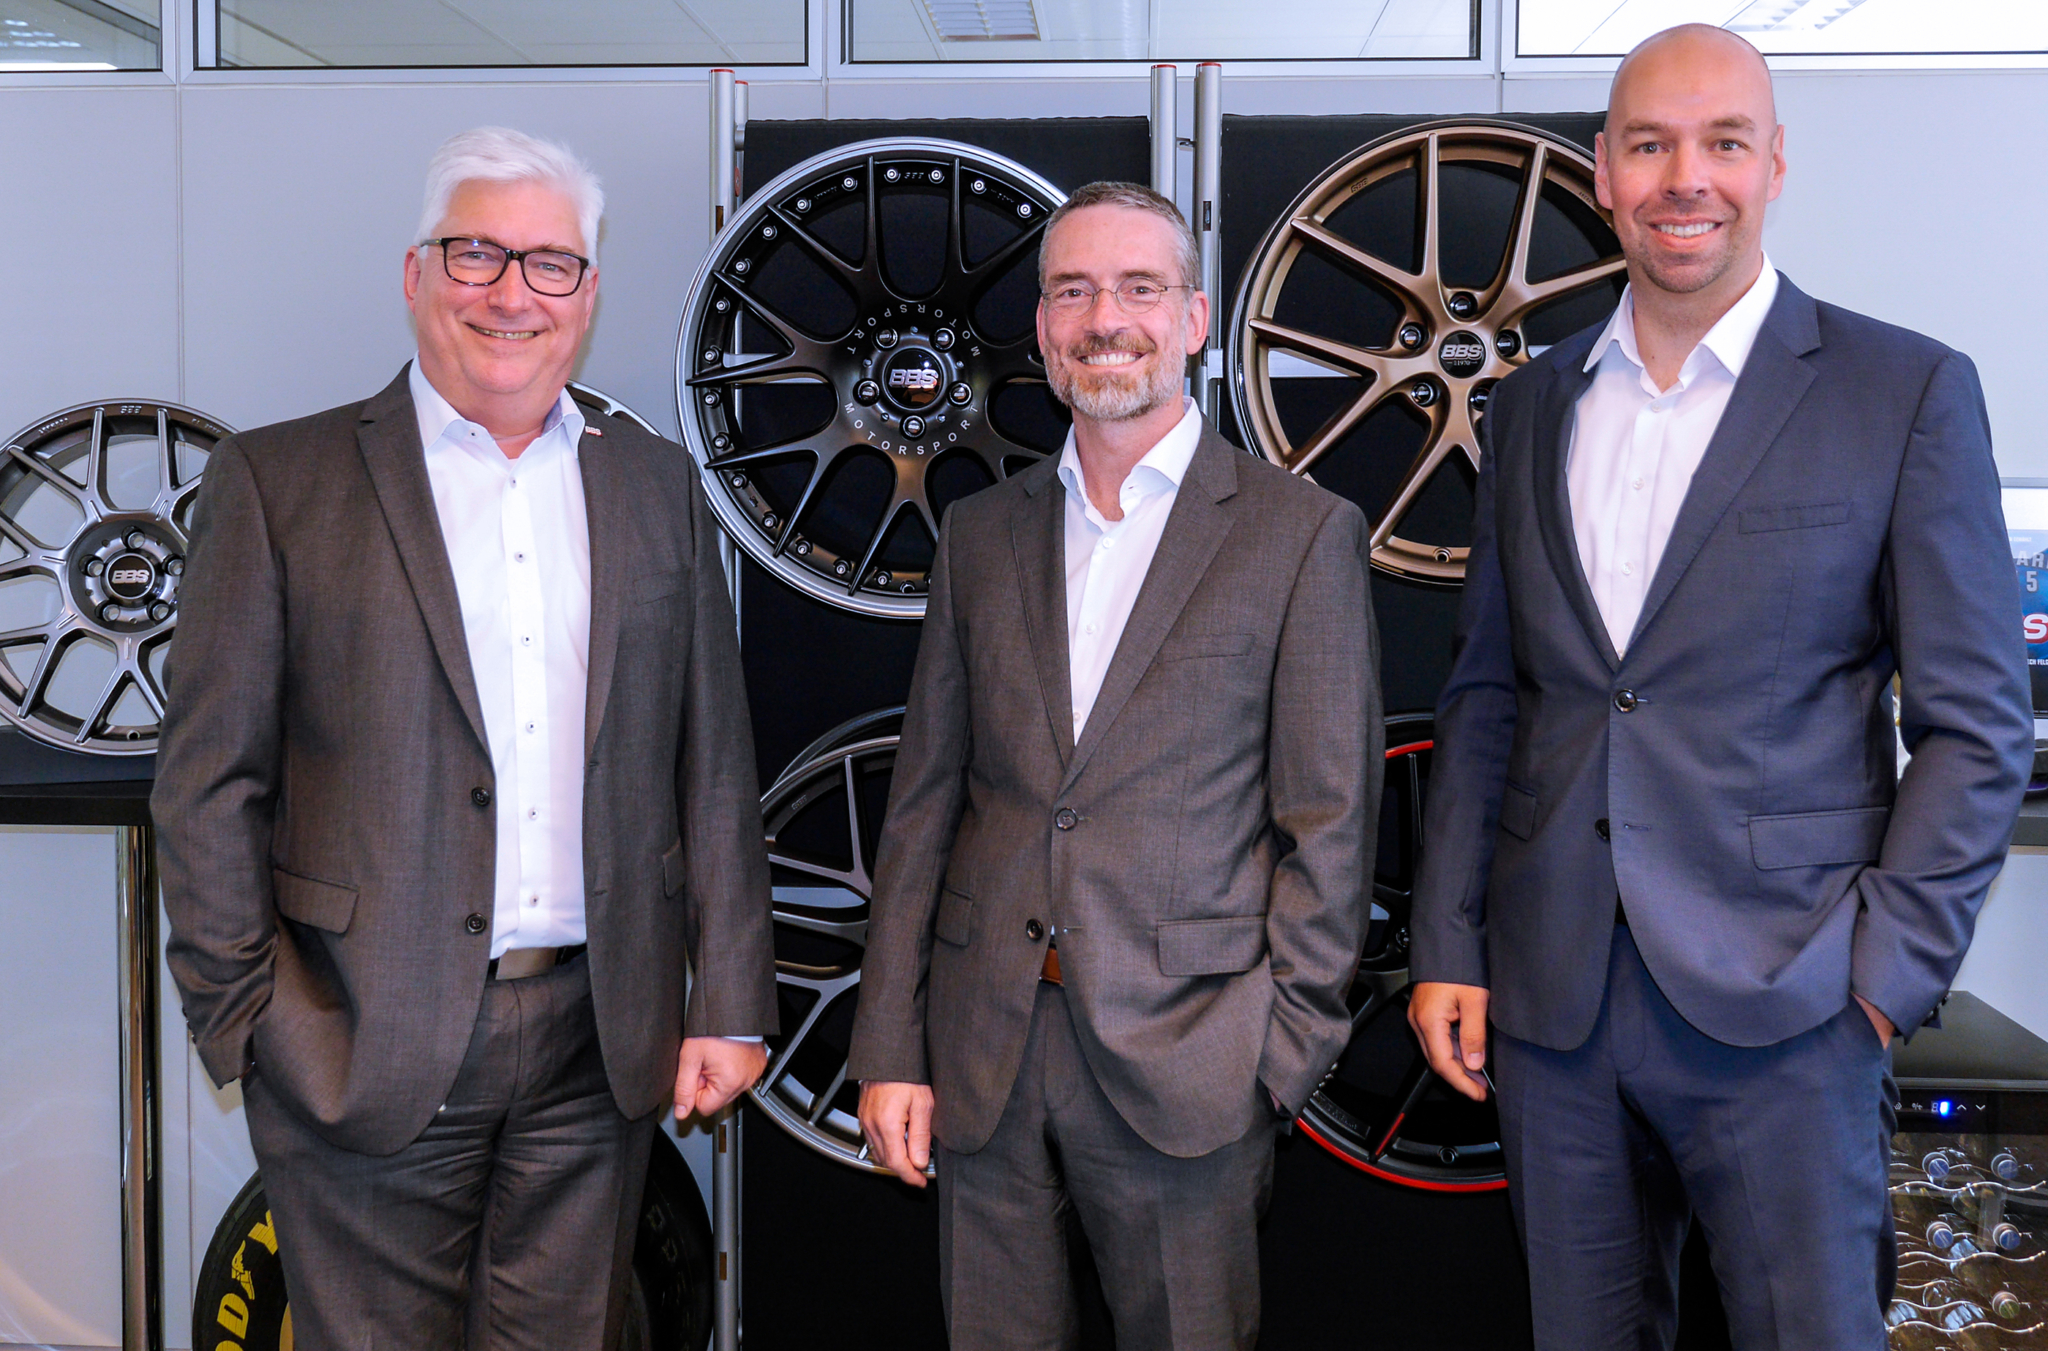 BBS appoints Markus Wartosch as global head of sales and marketing